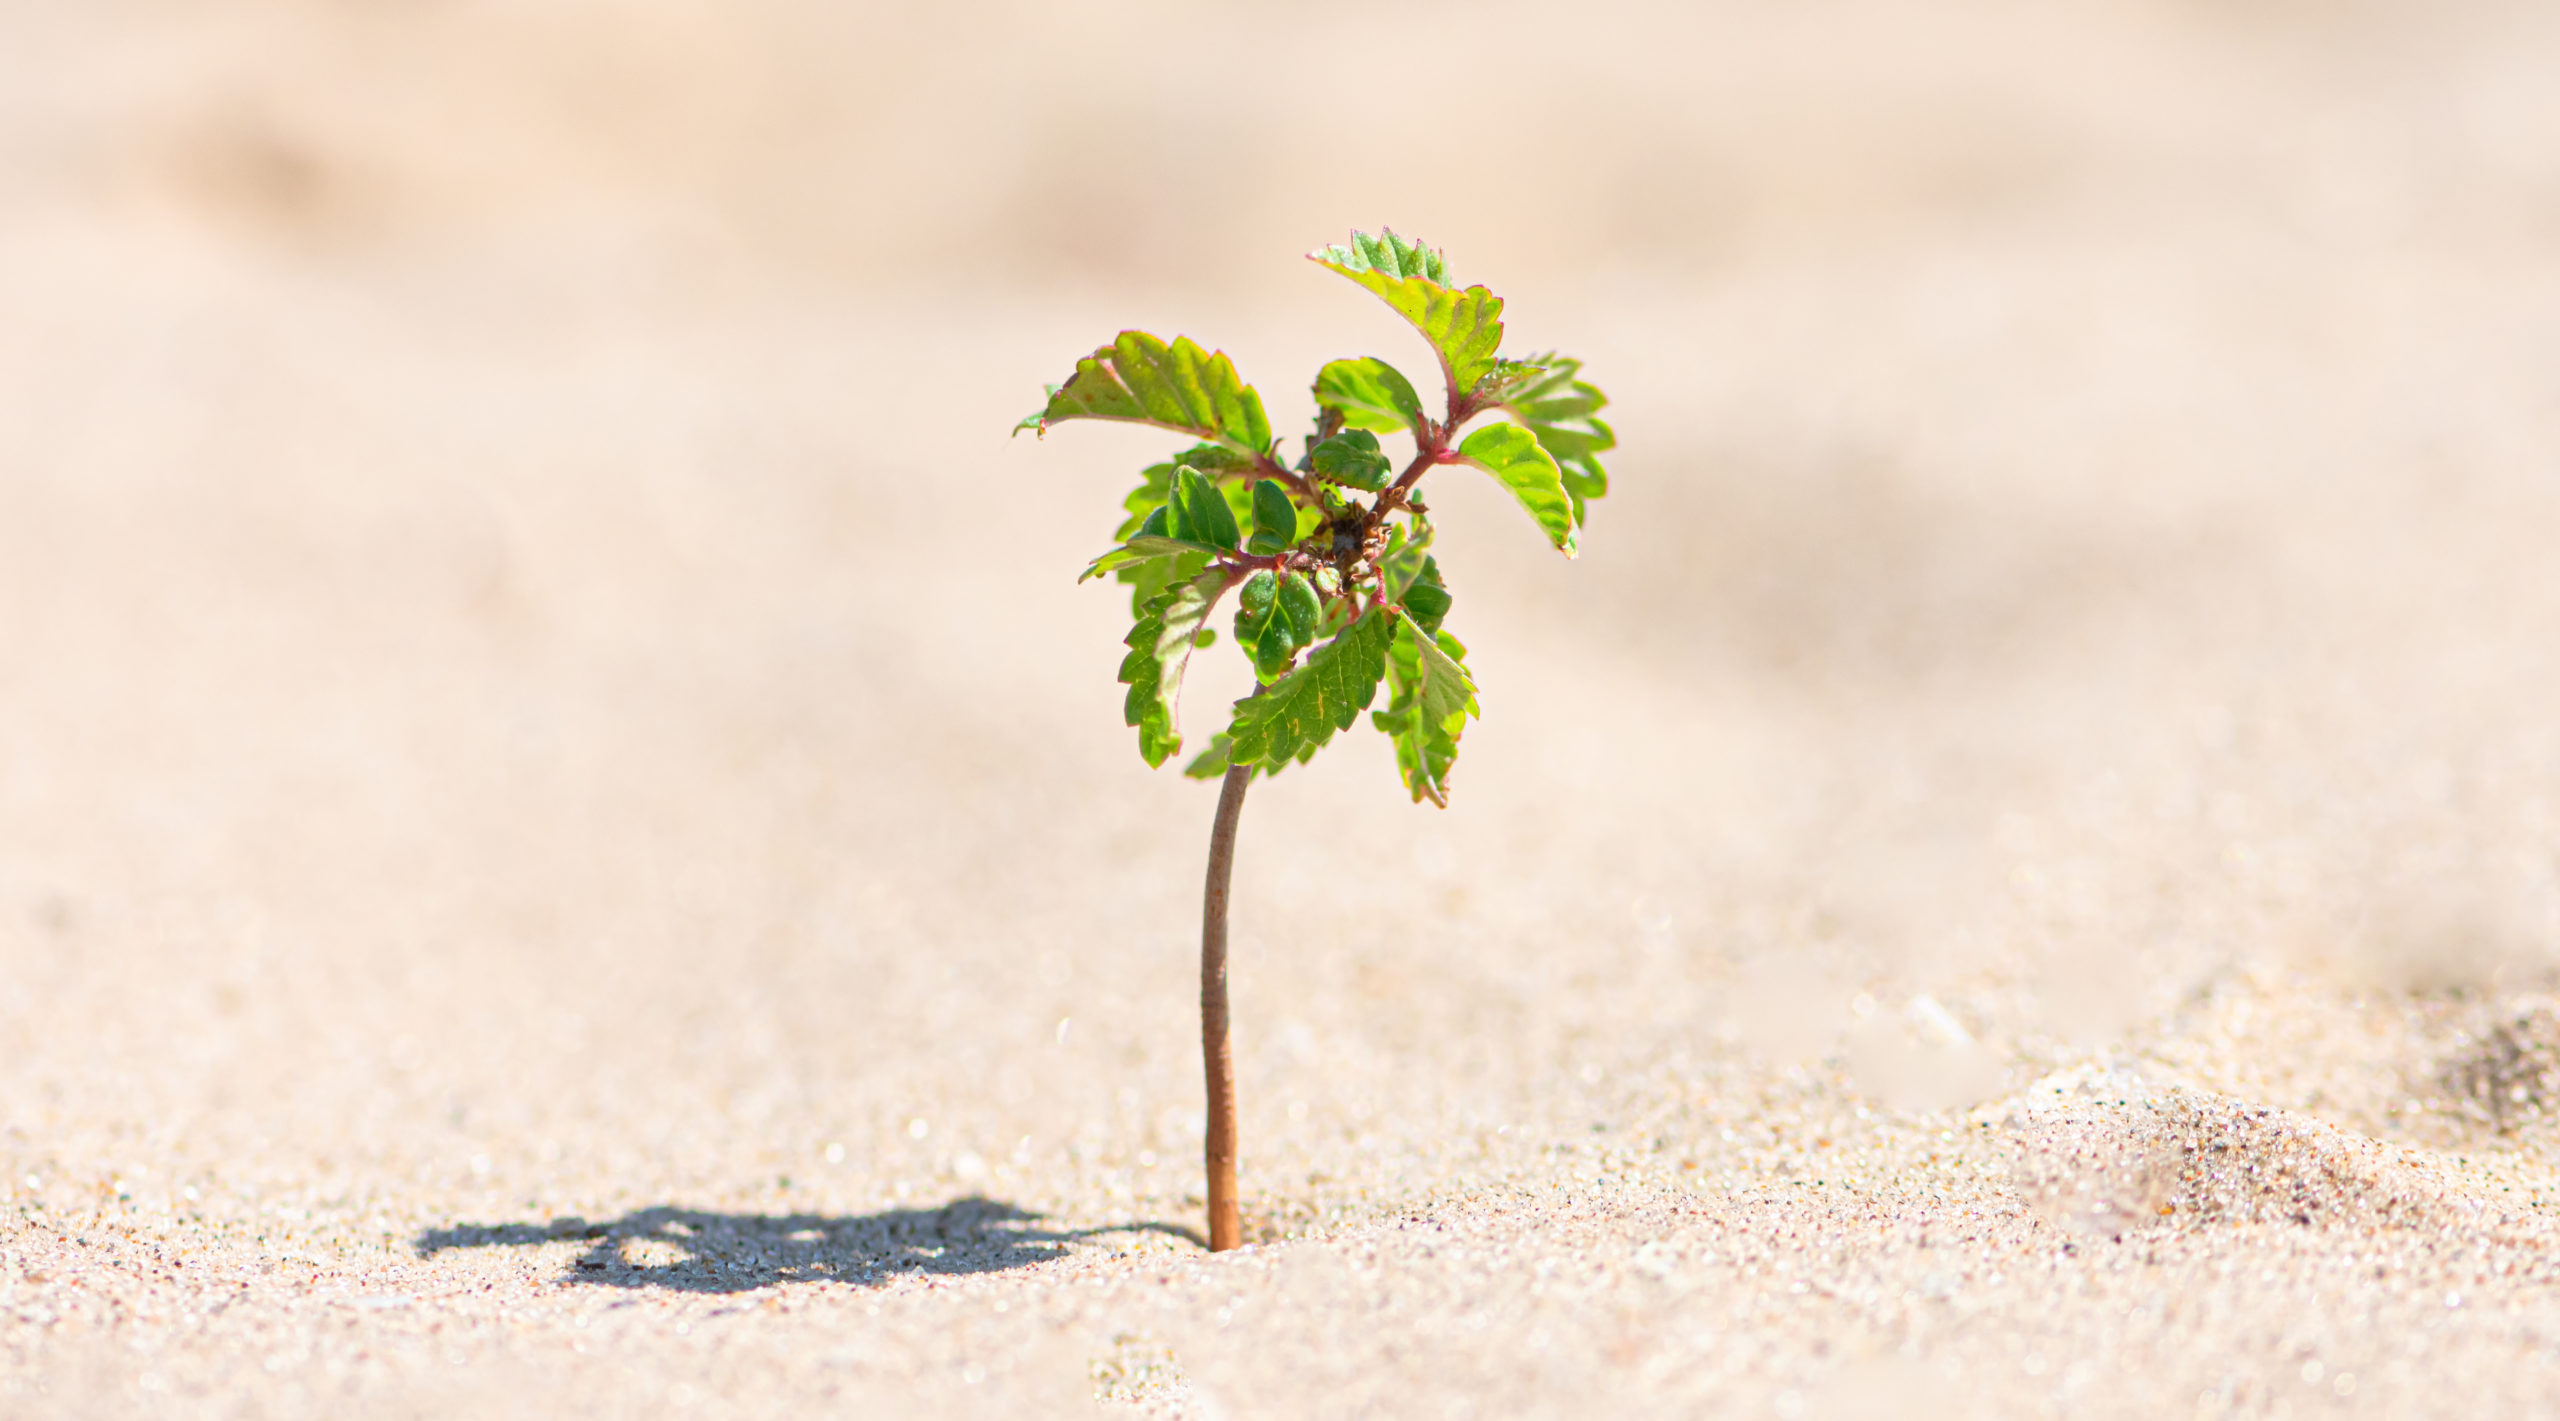 Image of a young tree alone in the desert sand to describe how God is doing a new thing